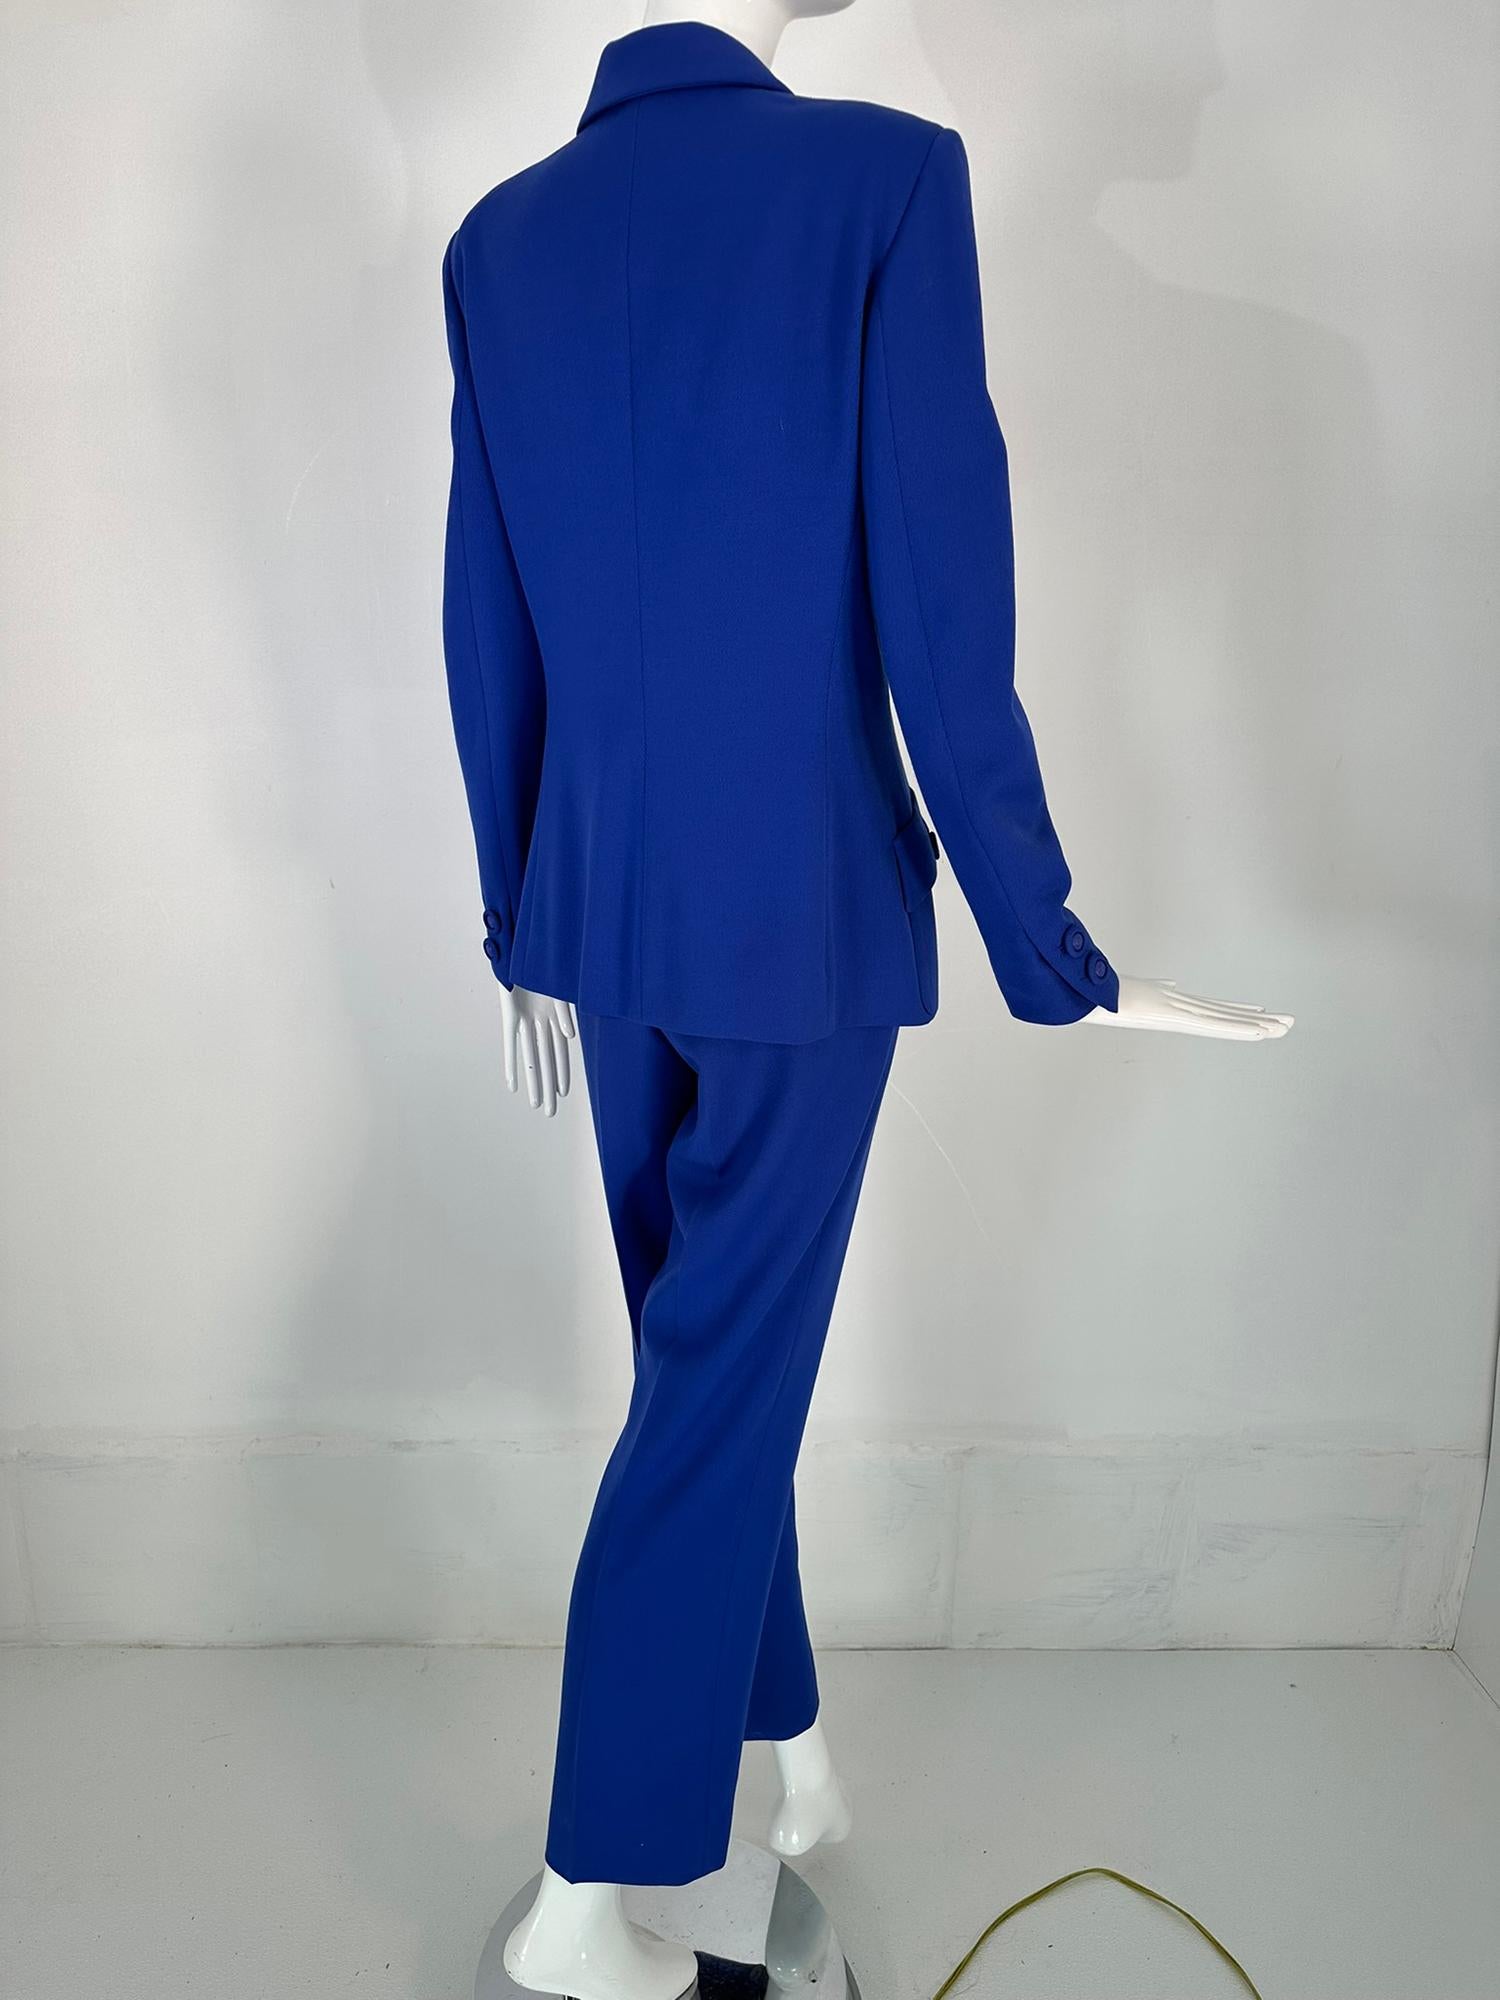 Gianni Versace Couture F/W 1995 Royal Blue Wool Pant Suit  For Sale 4